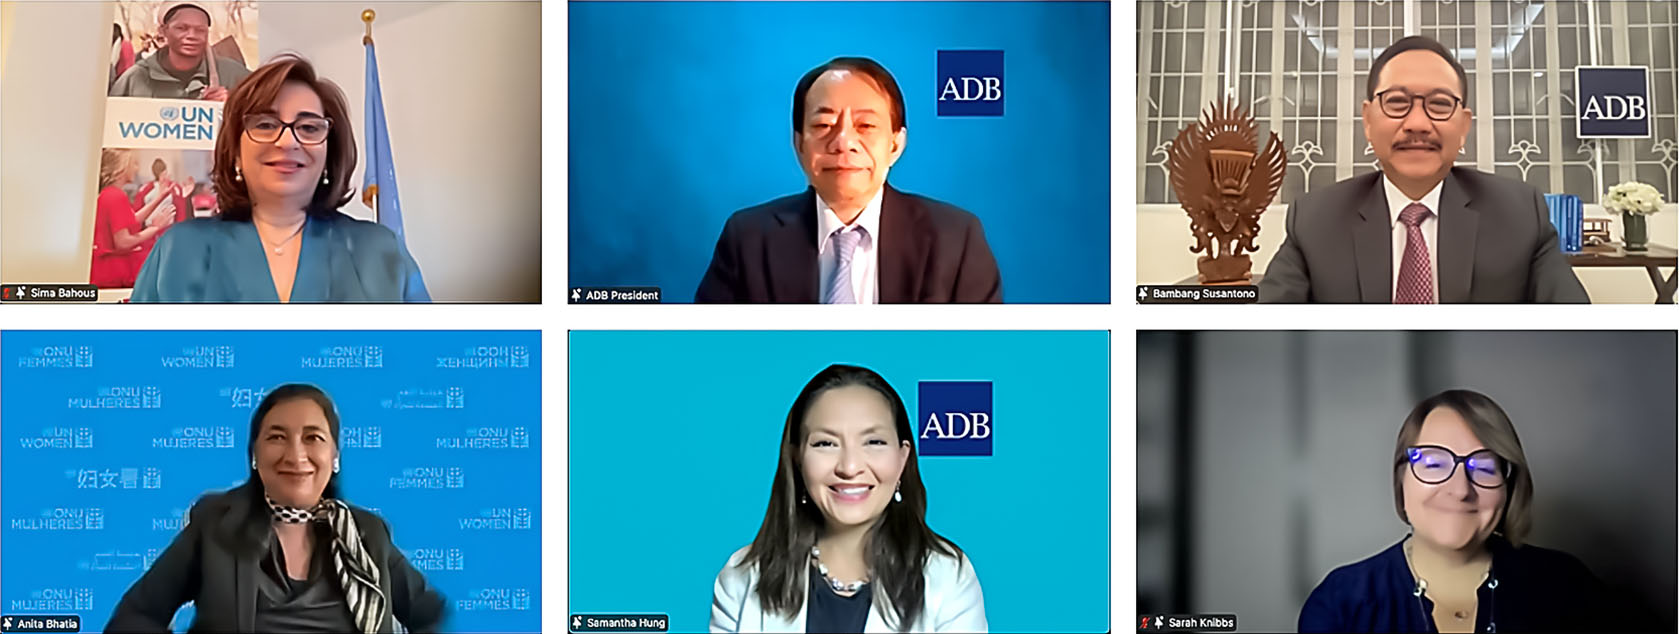 (From left, first row) UN Women Executive Director, Sima Bahous; ADB President Masatsugu, at press time, and Vice President, Bambang Susantono.(Second row) UN Women Deputy Executive Director, Anita Bhatia; Chief of Gender Equality Thematic Group at ADB, Samantha Hung; and Officer-in-Charge at UN Women Regional Office for Asia and the Pacific, Sarah Knibbs.